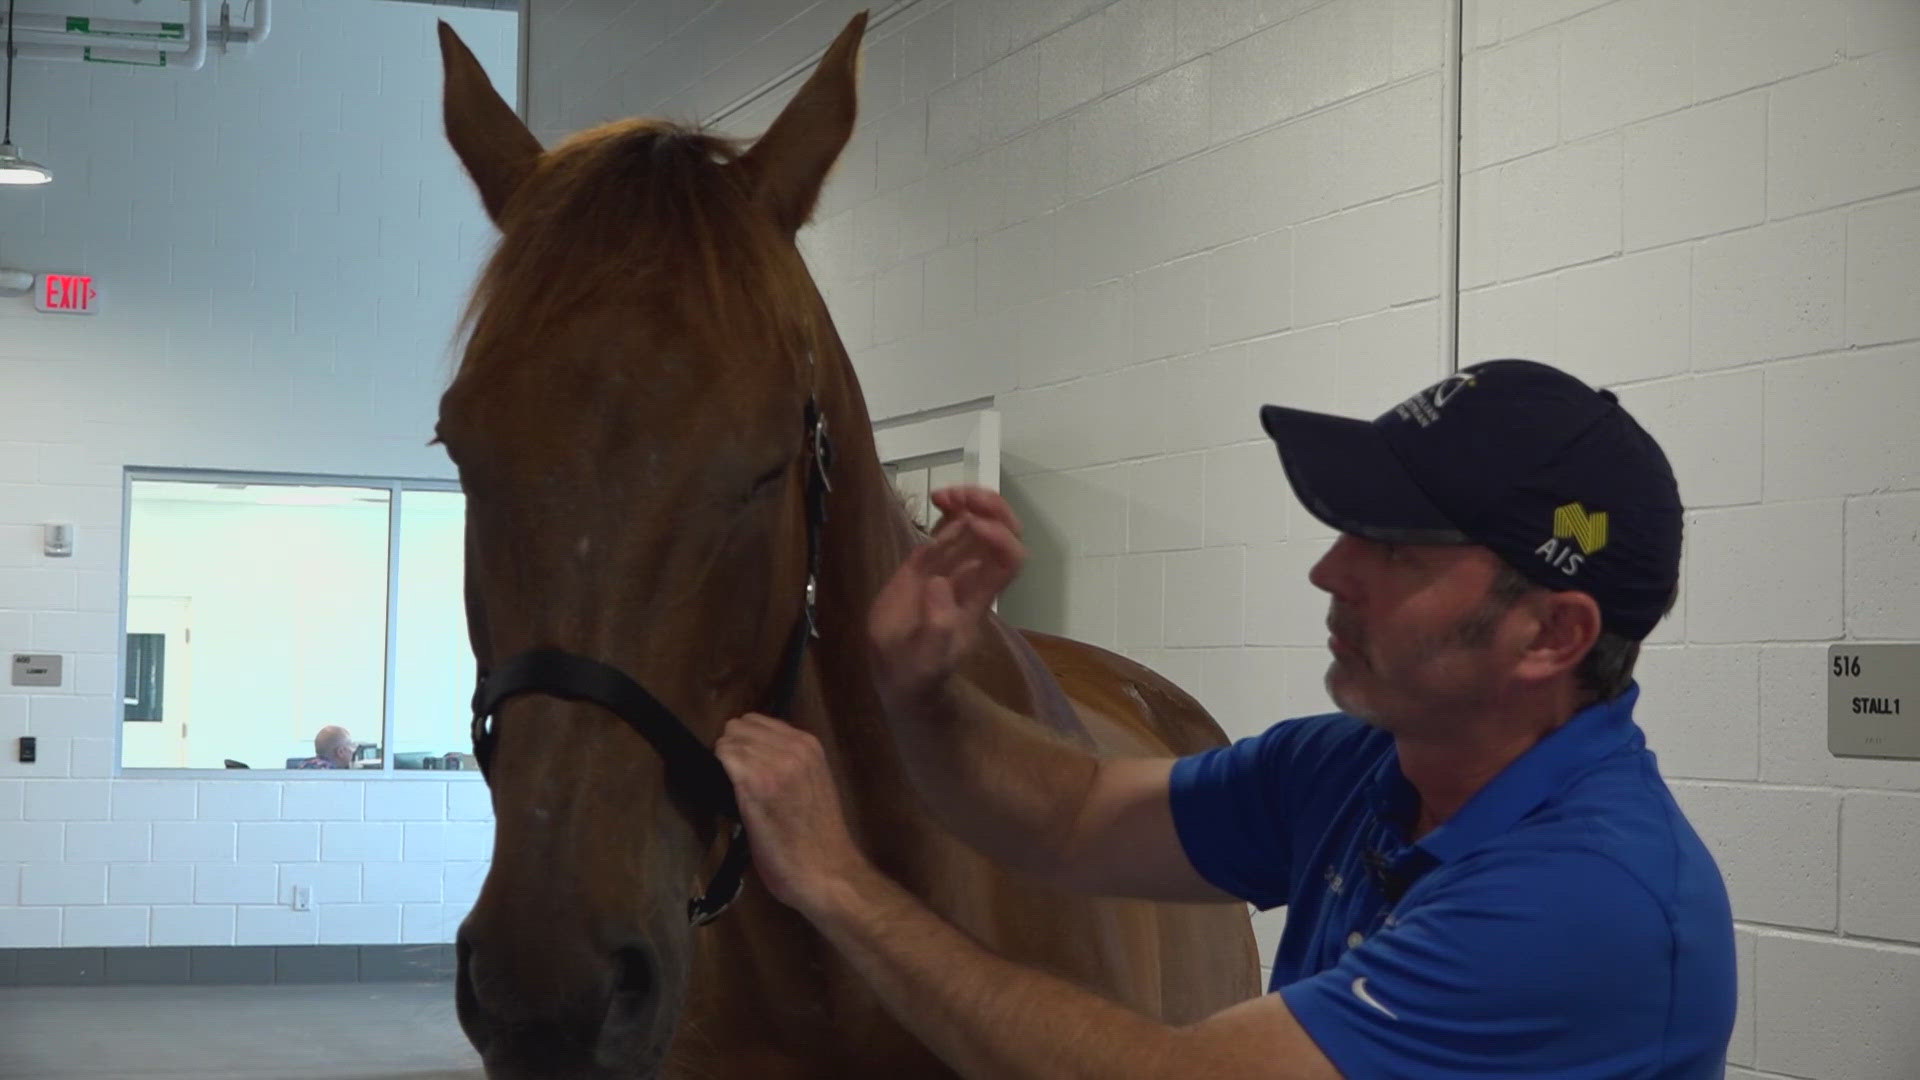 With a little over a month until the first day of the 2024 Olympics, a UF professor is getting ready to travel to Paris. Not as an athlete, but as a veterinarian.